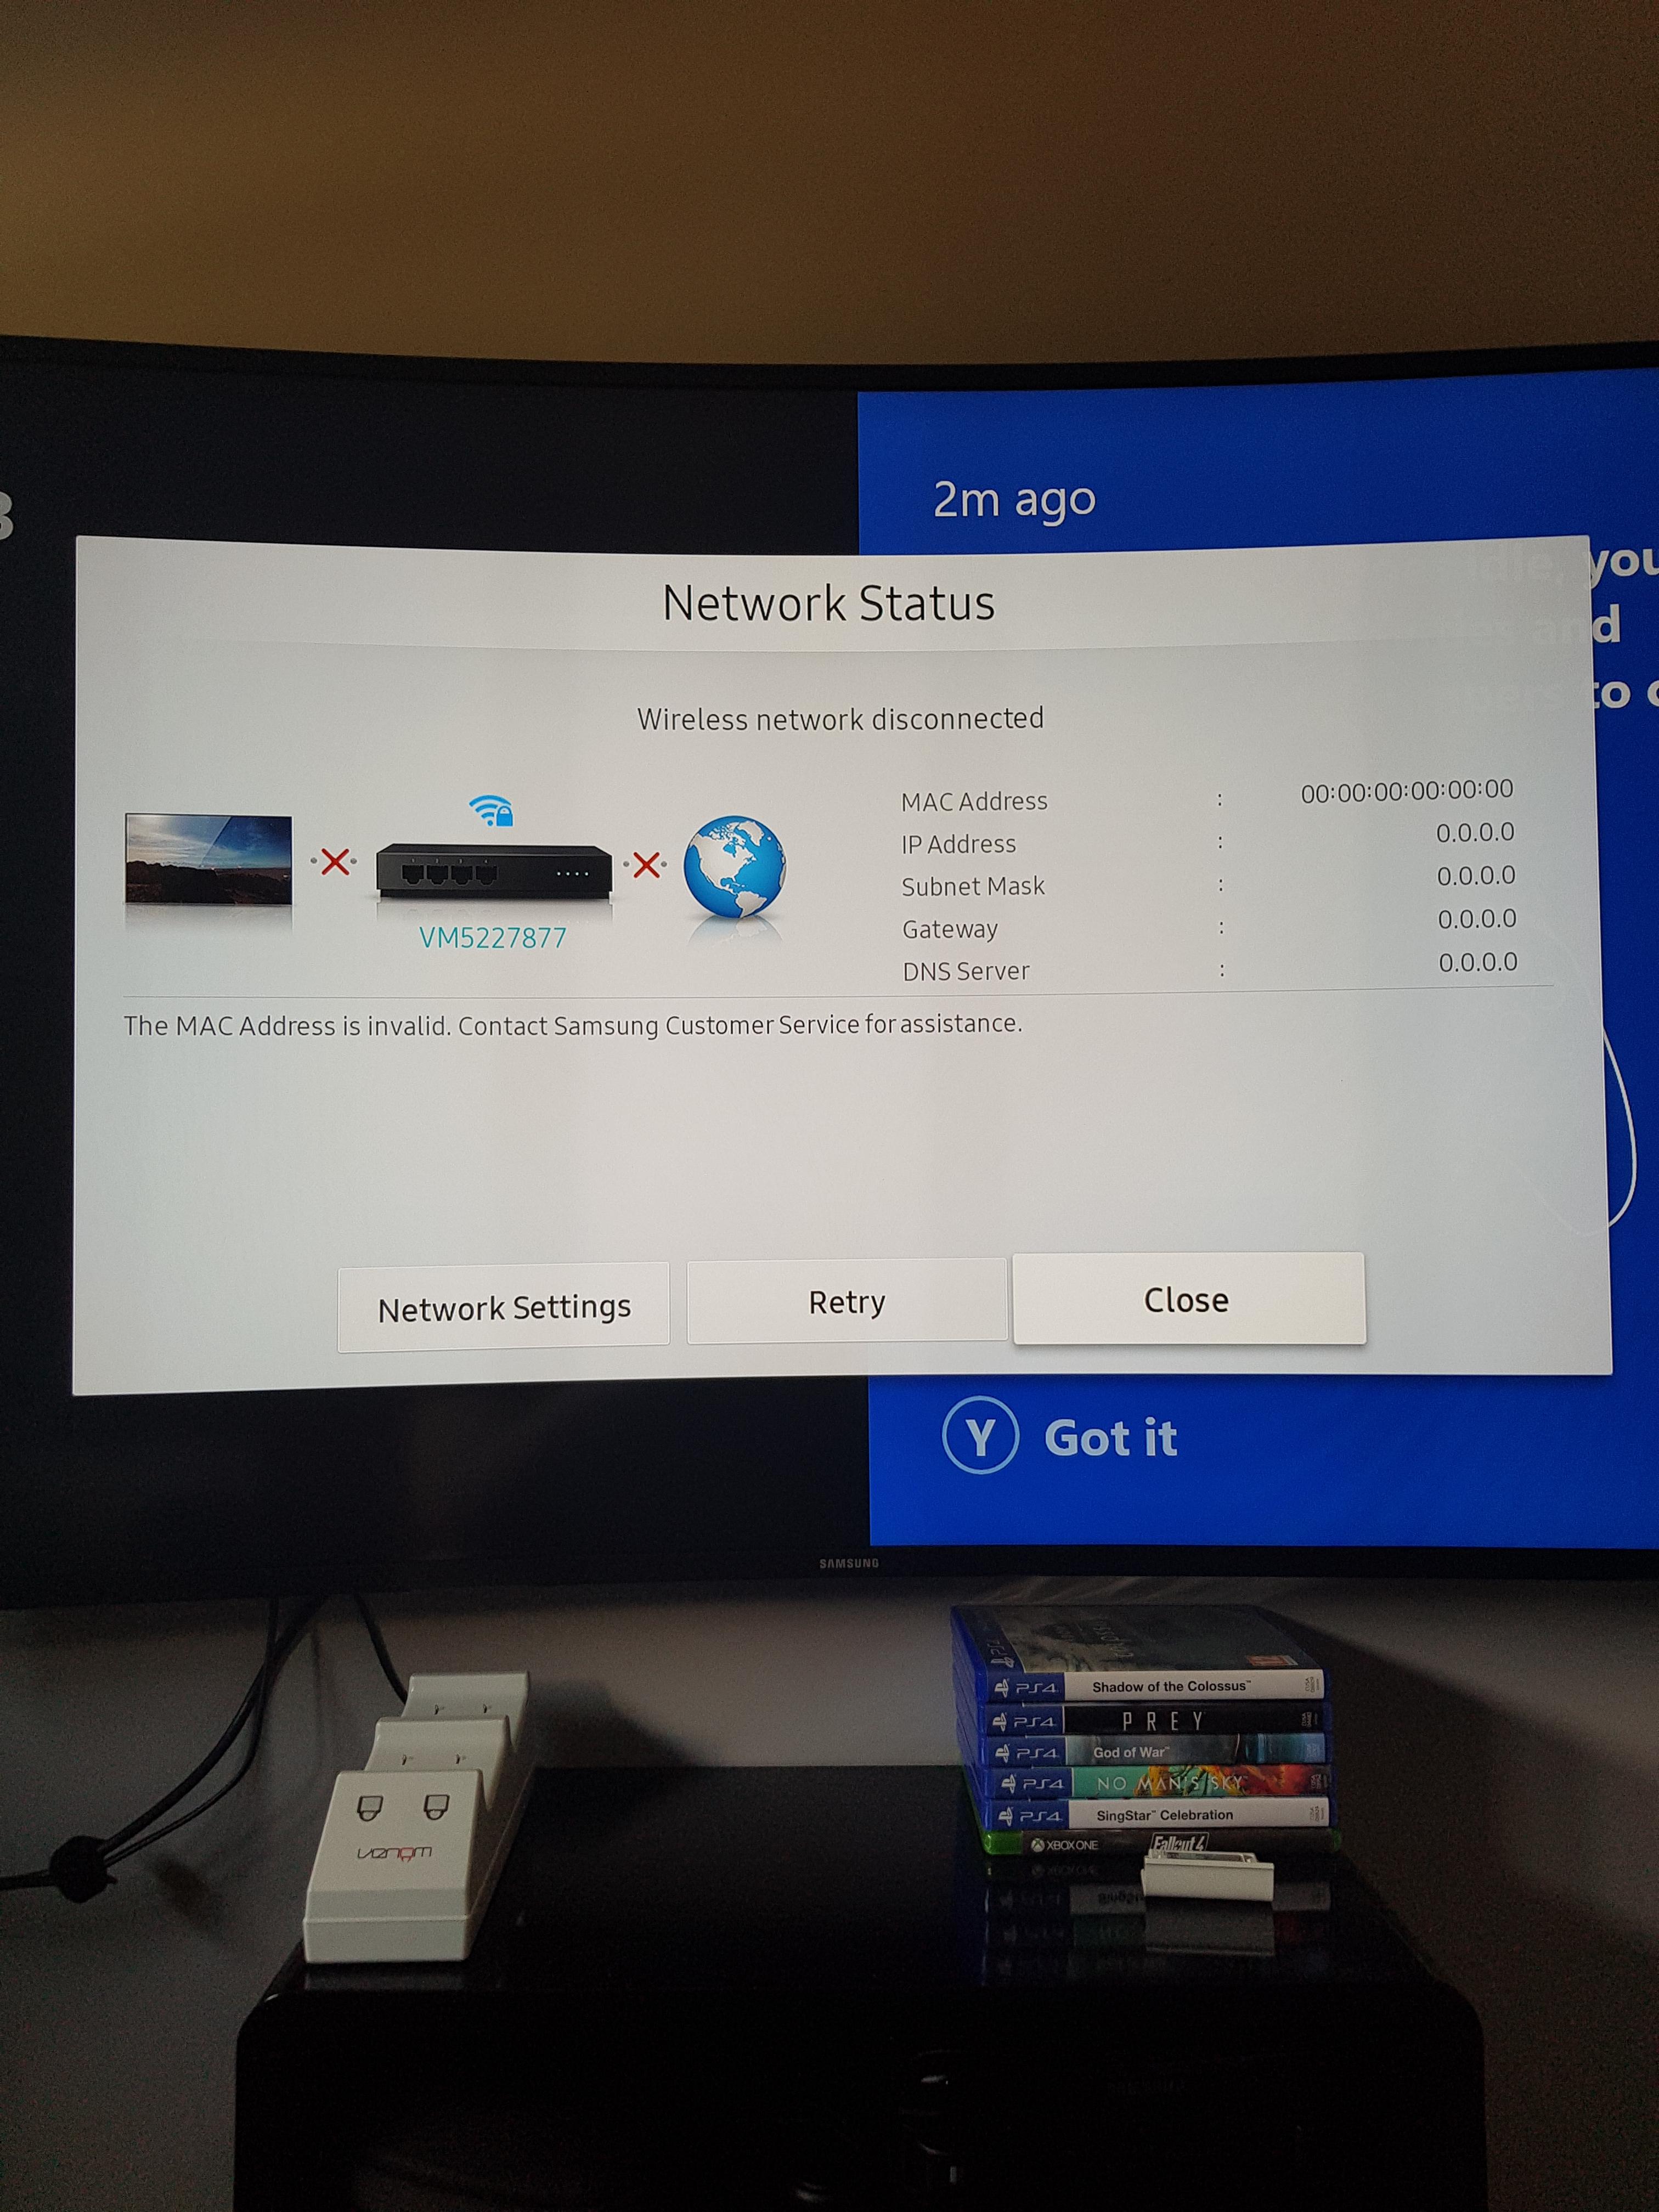 mac address once tv back on from being off - Samsung Community